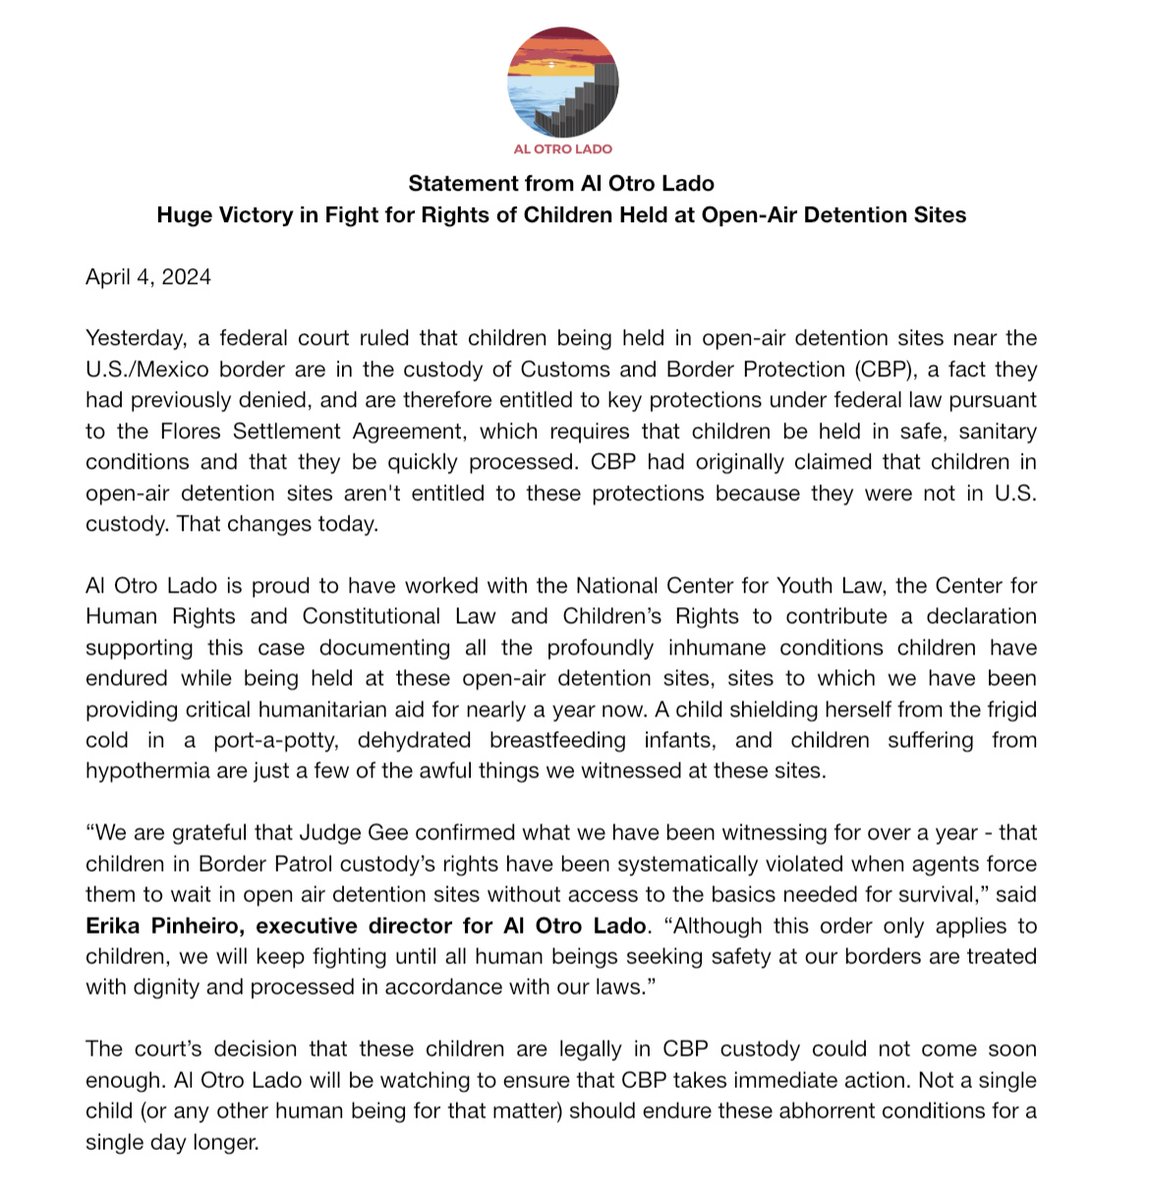 @NCYLnews @chrclla @ChildrensRights 'We are grateful that Judge Gee confirmed what we have been witnessing for over a year - that children in BP custody’s rights have been systematically violated when agents force them to wait in OADS without access to the basics needed for survival.'- @eeerox. Our full statement⤵️